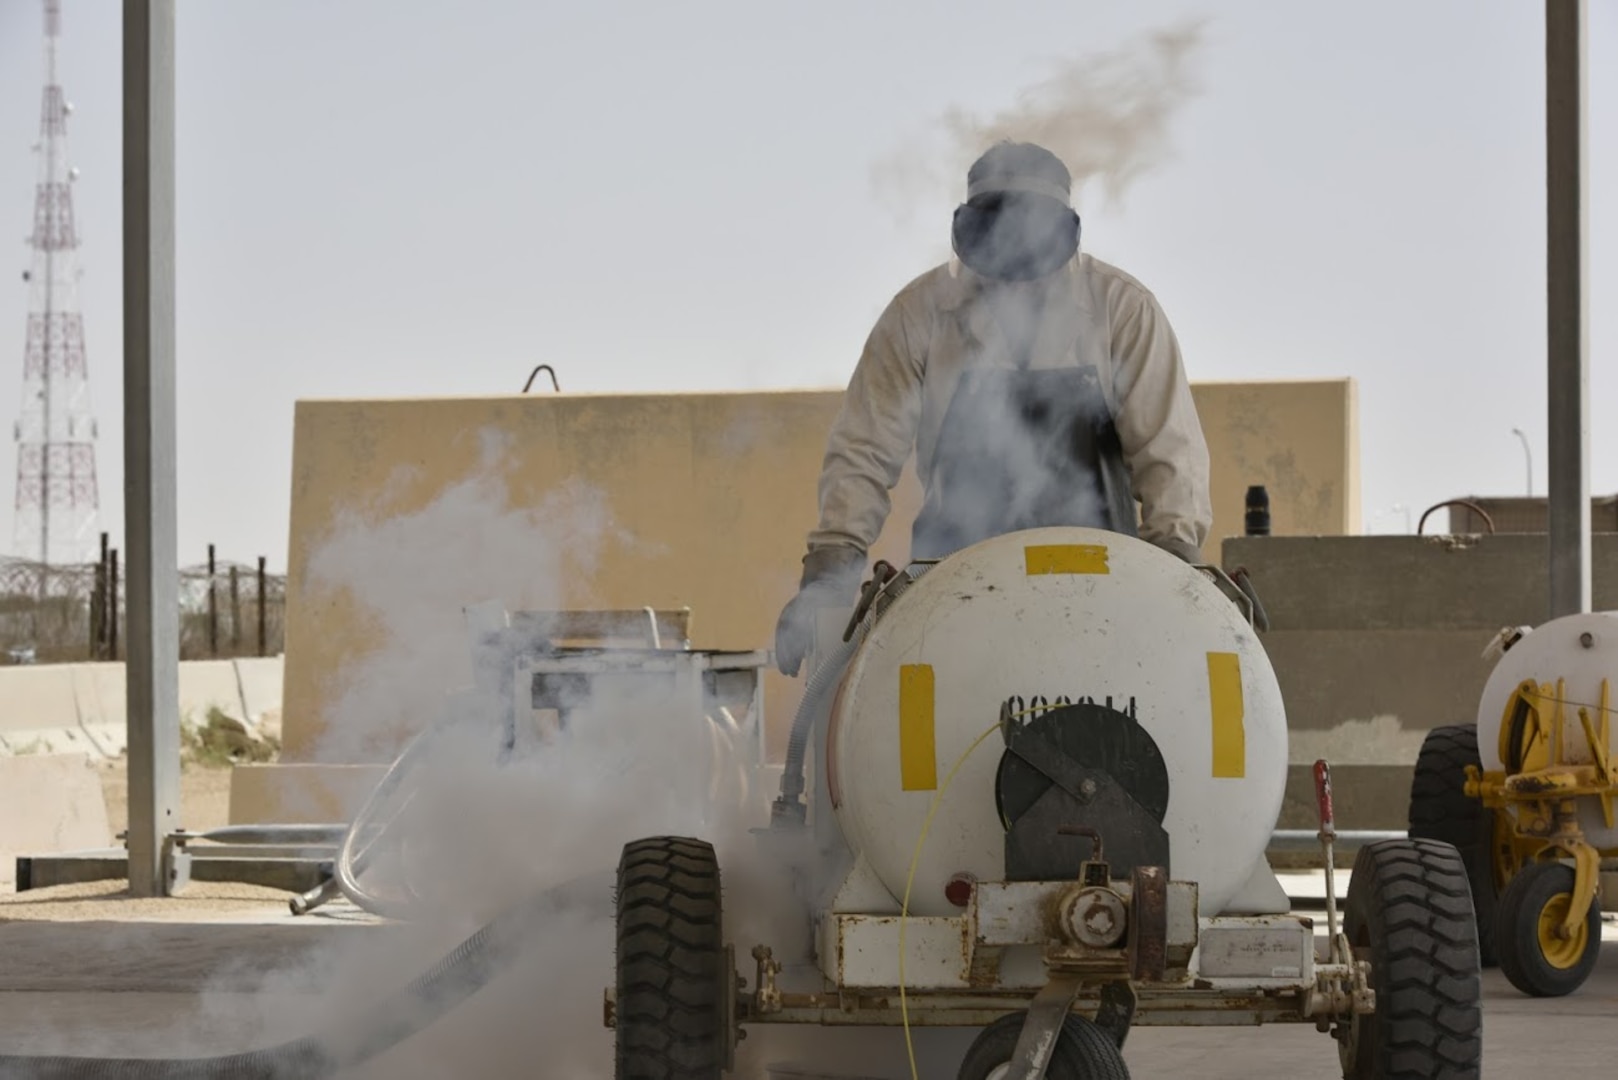 U.S. Marine Corps Lance Cpl. Patrick Cook, Marine Aerial Refueler Transport Squadron VMGR-352 safety and survival aircraft mechanic, monitors the intake of liquid oxygen into a portable tank May 10, 2017, in Southwest Asia. Fuel technicians maintain all POL substances, from diesel and gasoline to jet fuel and liquid oxygen. Liquid oxygen allows fighter pilots to breathe safely at high altitude during the fight against ISIS. The team here at the 407th Air Expeditionary Group supplies U.S. Marine Corps and coalition aircraft. (U.S. Air Force photo by Senior Airman Ramon A. Adelan)